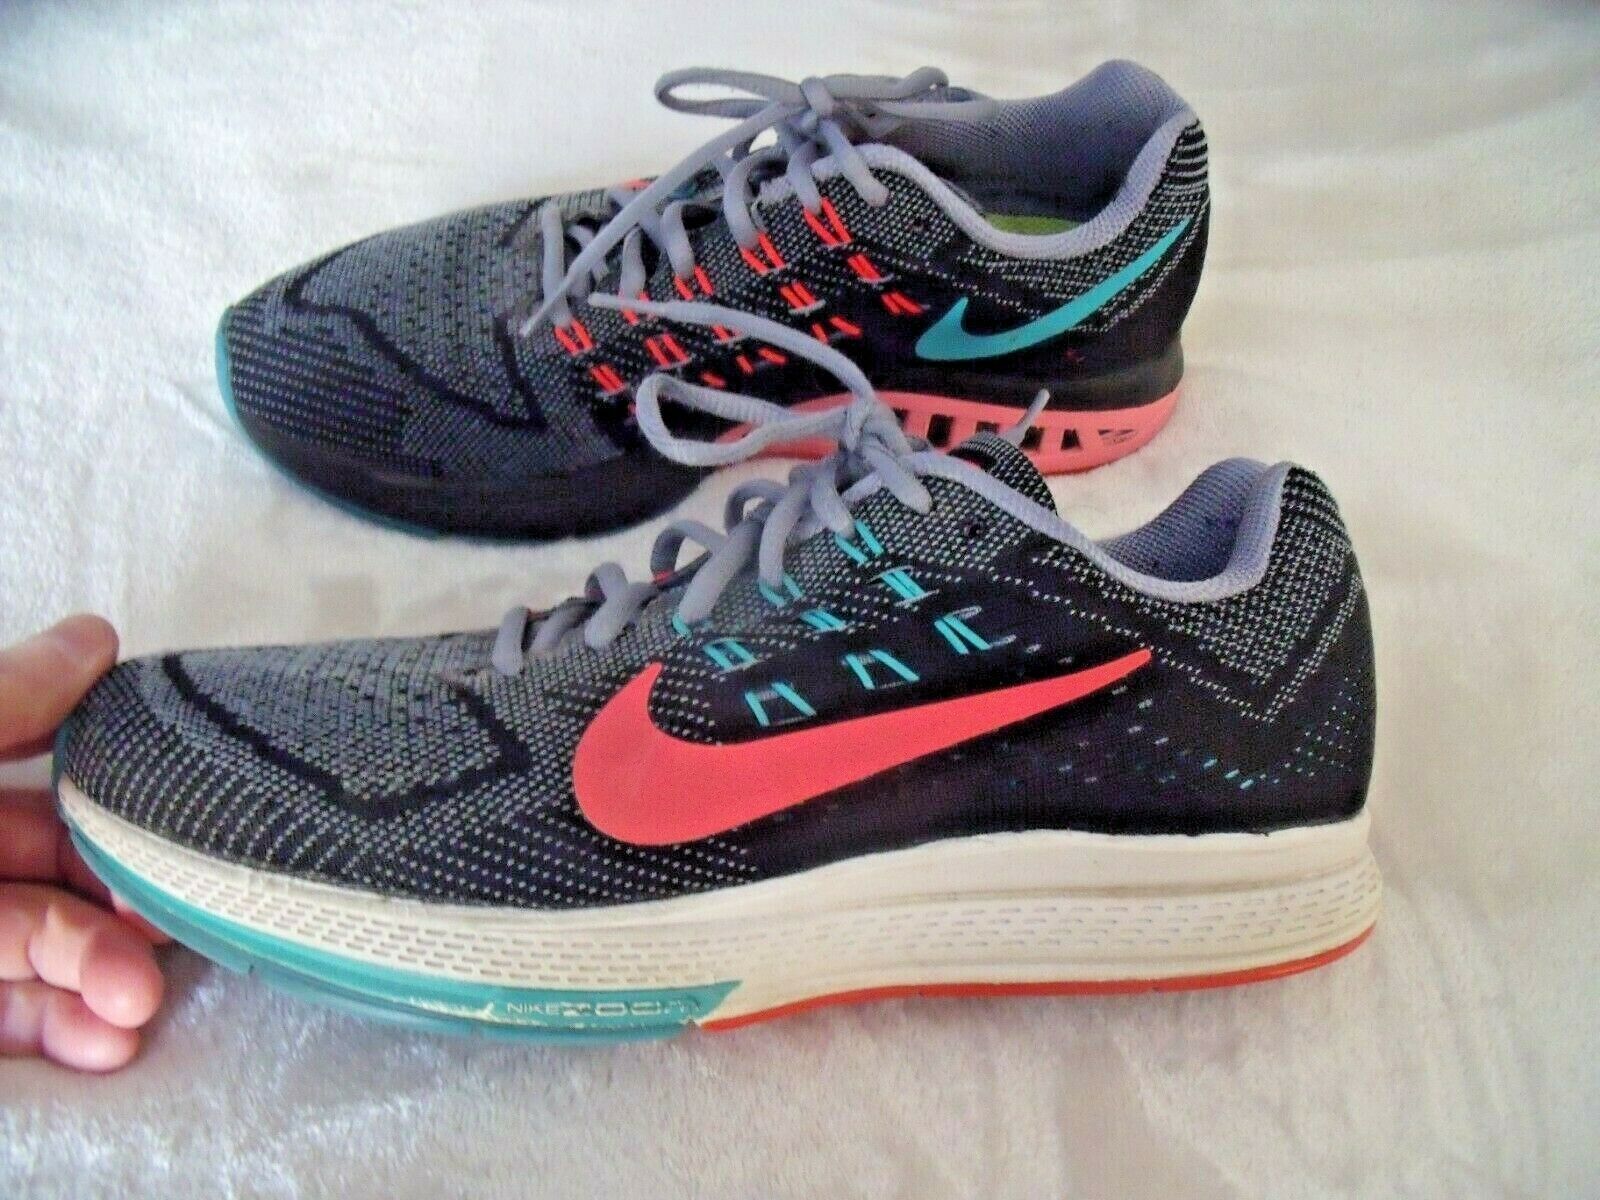 Primary image for  Women 10 NIKE Air Zoom Structure 18 Hyper Punch RUNNING SNEAKERS Black Green   